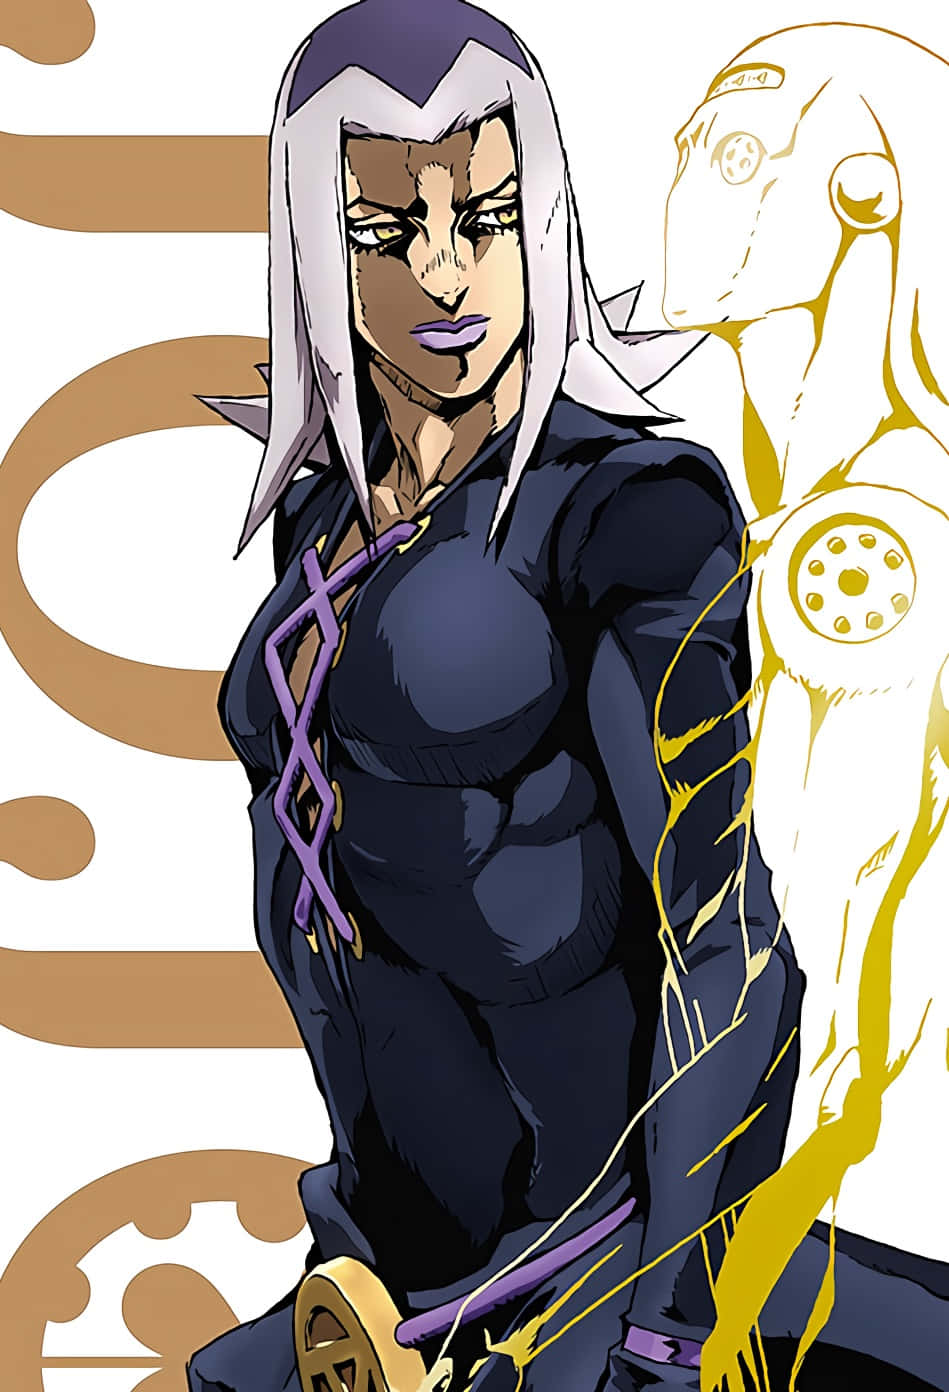 Leone Abbacchio posing with his stand, Moody Blues Wallpaper